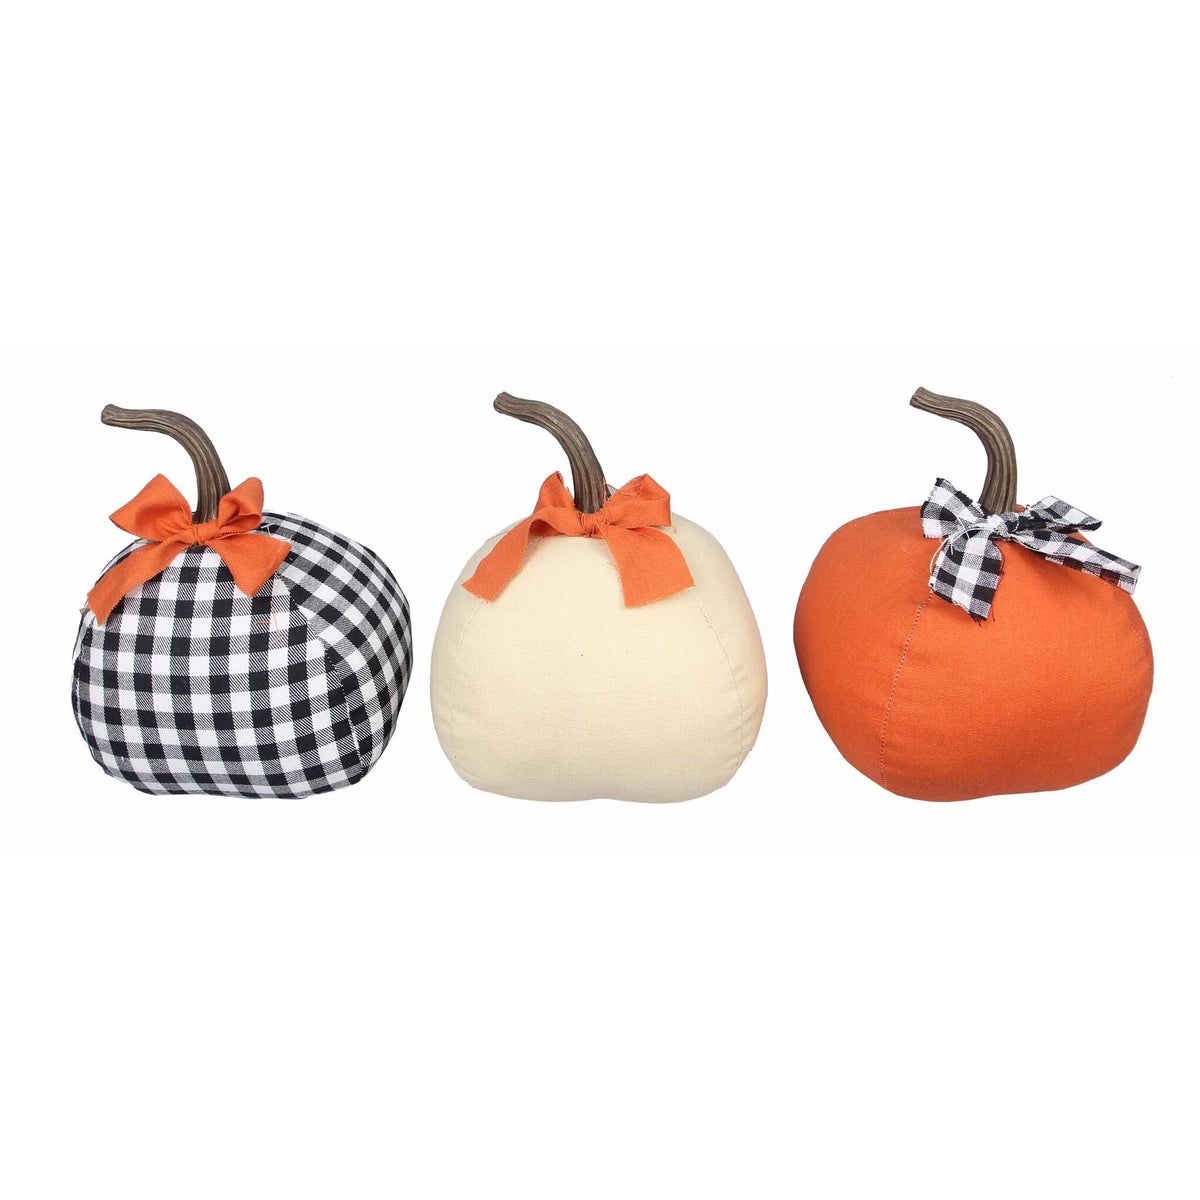 Fabric Pumpkins with Bow, 3 Assorted